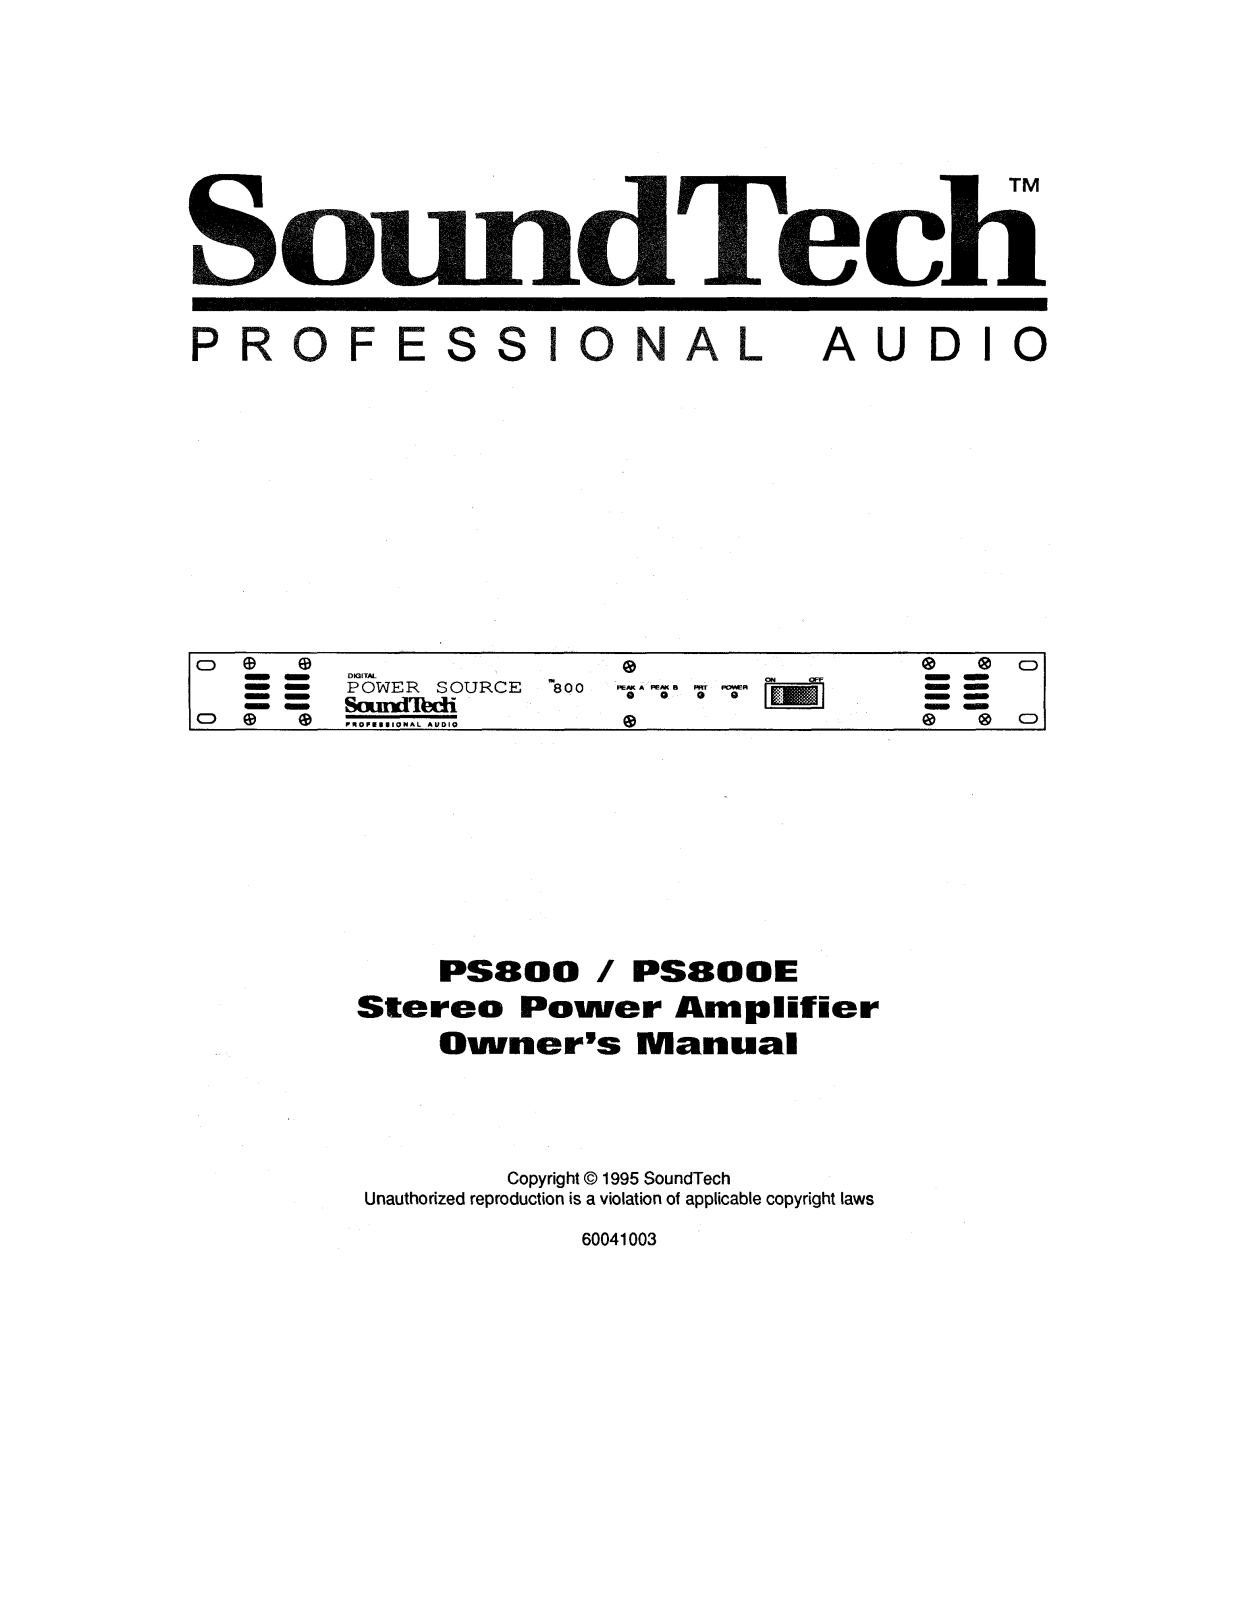 Soundtech PS800E, PS 800 Owner Manual